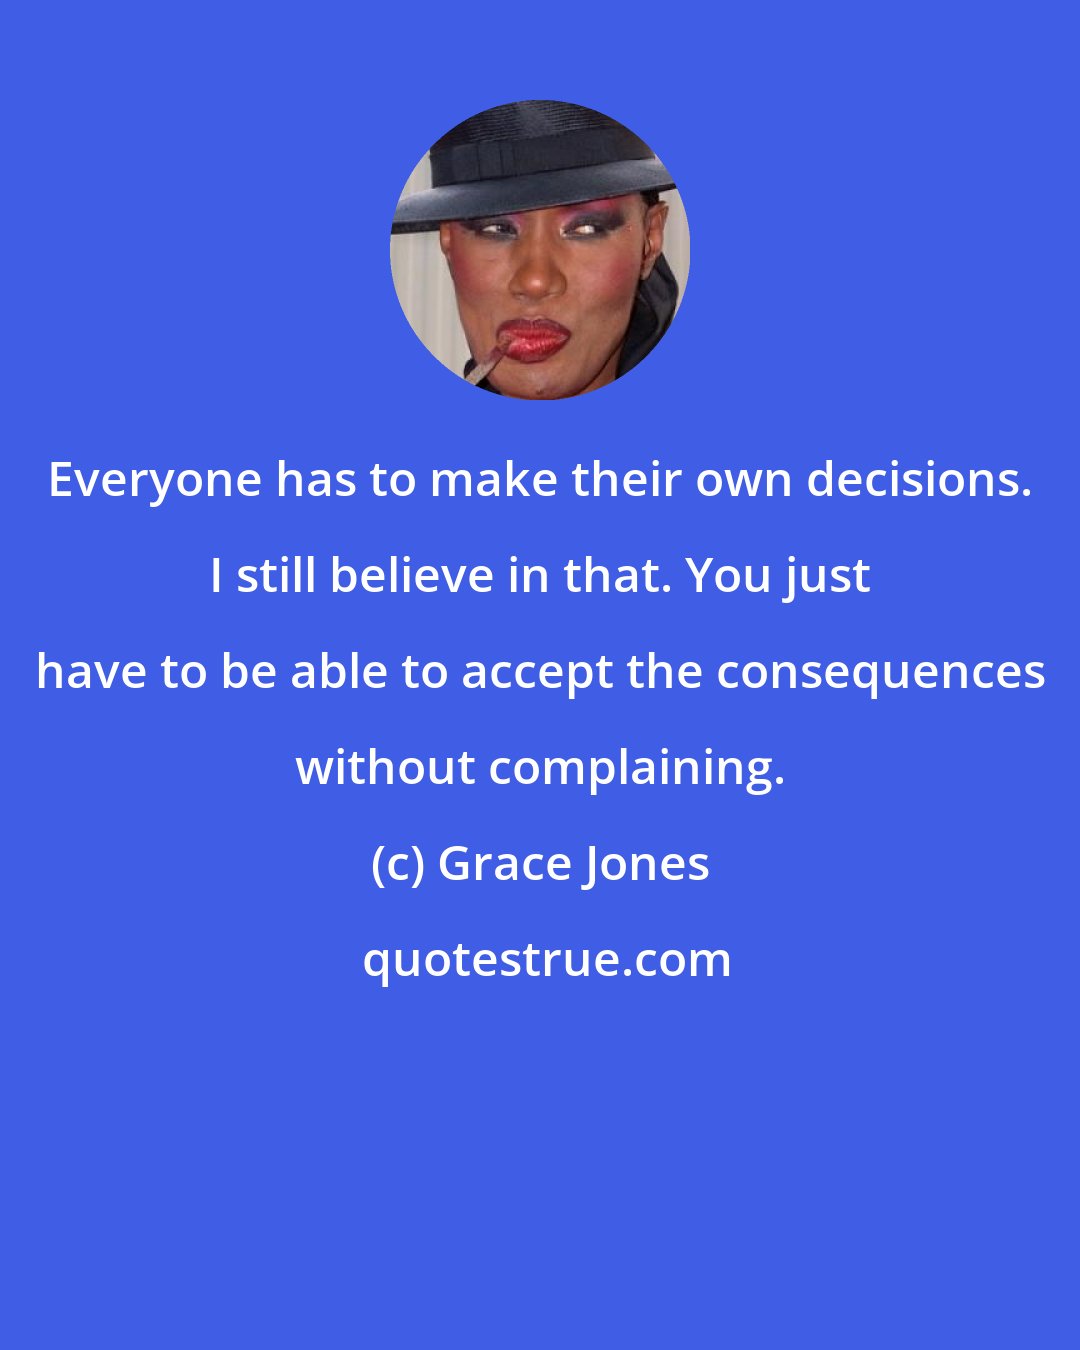 Grace Jones: Everyone has to make their own decisions. I still believe in that. You just have to be able to accept the consequences without complaining.